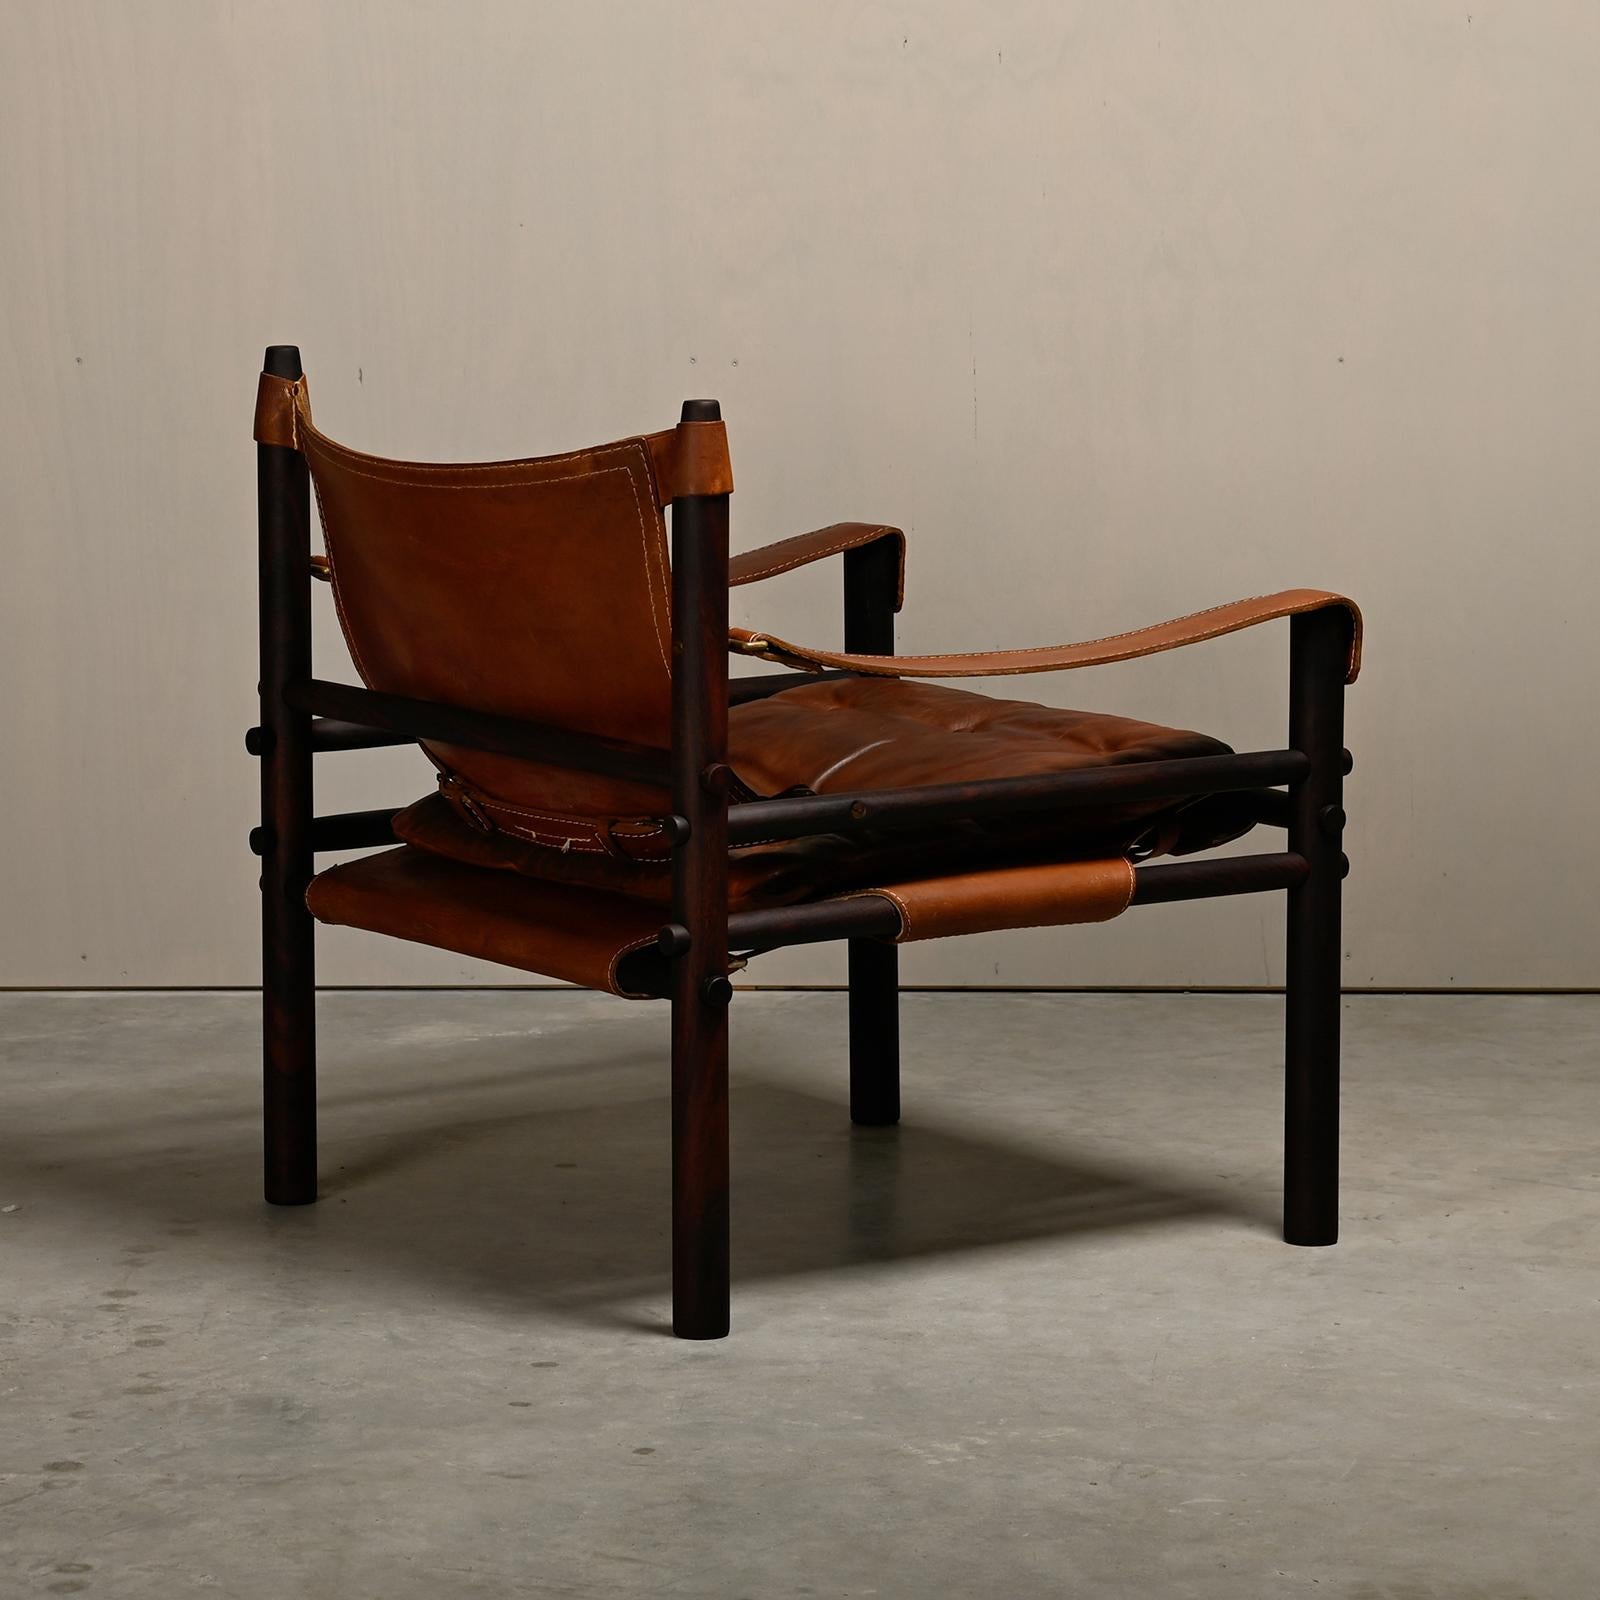 Mid-20th Century Arne Norell Sirocco Safari Lounge Chair in dark brown wood and leather, Sweden